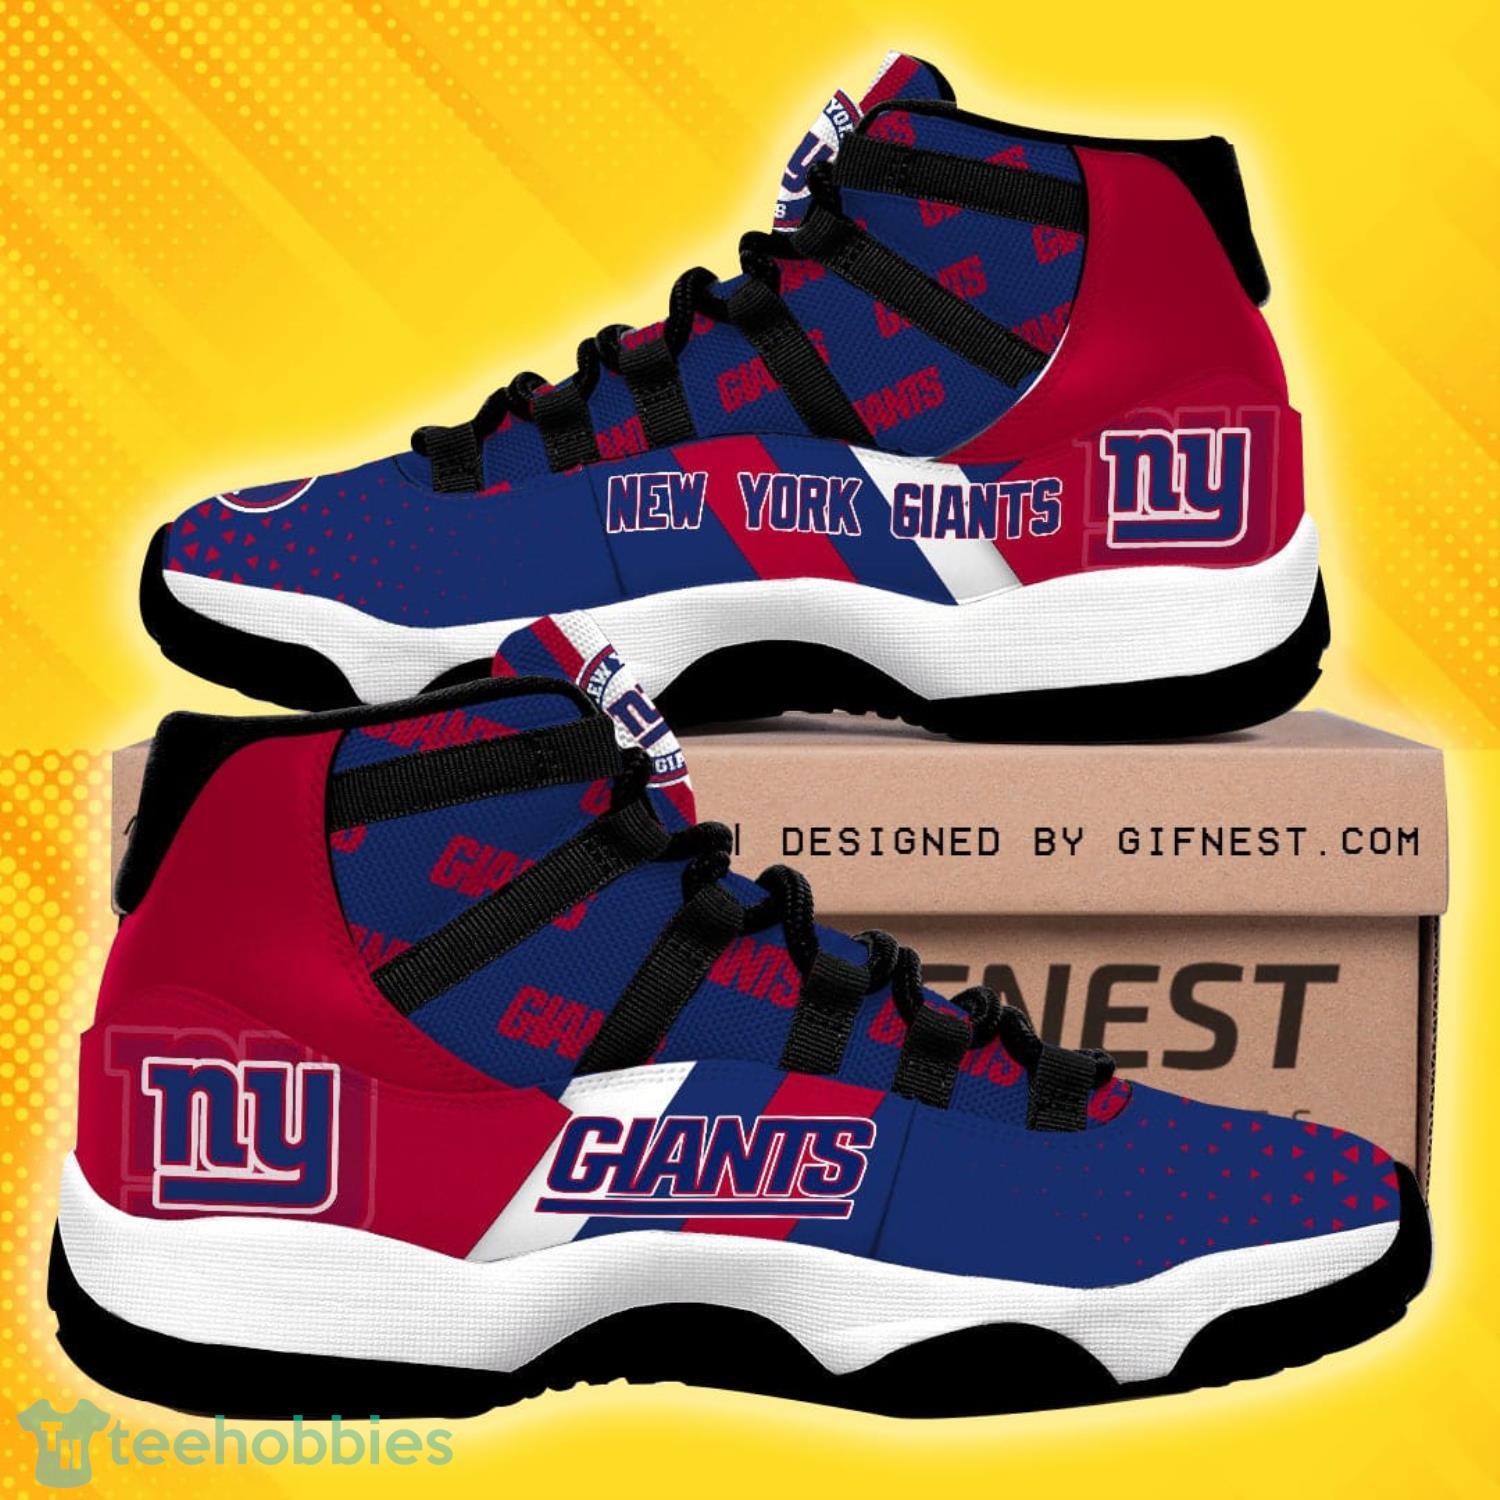 New York Giants Team Air Jordan 11 Shoes For Fans Product Photo 1